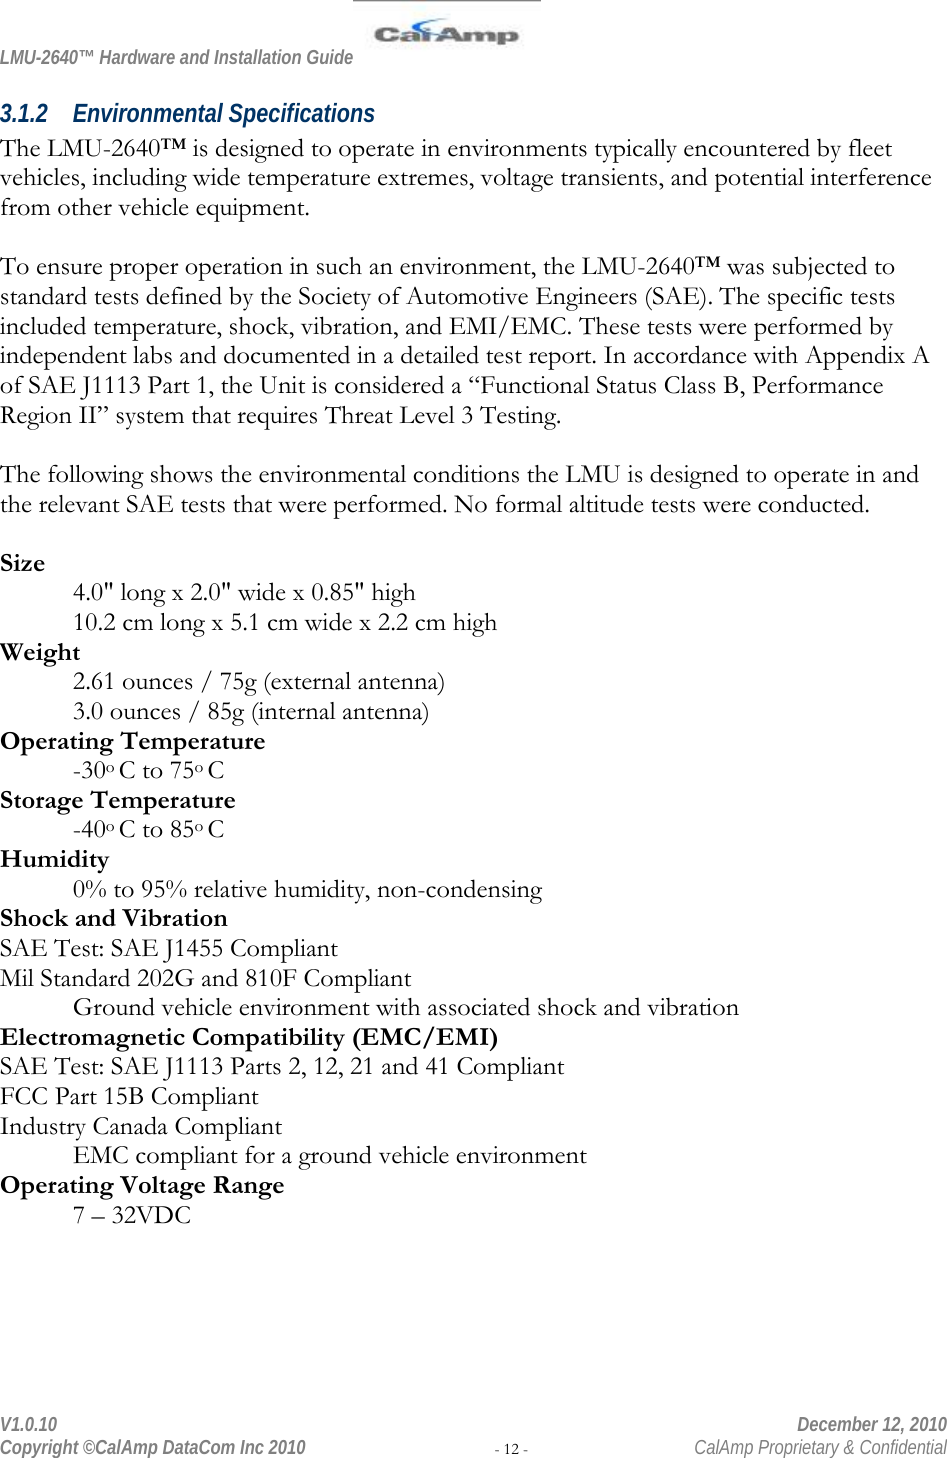 LMU-2640™ Hardware and Installation Guide  V1.0.10    December 12, 2010 Copyright ©CalAmp DataCom Inc 2010 - 12 -  CalAmp Proprietary &amp; Confidential 3.1.2 Environmental Specifications The LMU-2640™ is designed to operate in environments typically encountered by fleet vehicles, including wide temperature extremes, voltage transients, and potential interference from other vehicle equipment.   To ensure proper operation in such an environment, the LMU-2640™ was subjected to standard tests defined by the Society of Automotive Engineers (SAE). The specific tests included temperature, shock, vibration, and EMI/EMC. These tests were performed by independent labs and documented in a detailed test report. In accordance with Appendix A of SAE J1113 Part 1, the Unit is considered a “Functional Status Class B, Performance Region II” system that requires Threat Level 3 Testing.   The following shows the environmental conditions the LMU is designed to operate in and the relevant SAE tests that were performed. No formal altitude tests were conducted.  Size 4.0&quot; long x 2.0&quot; wide x 0.85&quot; high 10.2 cm long x 5.1 cm wide x 2.2 cm high Weight 2.61 ounces / 75g (external antenna) 3.0 ounces / 85g (internal antenna) Operating Temperature -30o C to 75o C Storage Temperature  -40o C to 85o C Humidity 0% to 95% relative humidity, non-condensing Shock and Vibration SAE Test: SAE J1455 Compliant Mil Standard 202G and 810F Compliant Ground vehicle environment with associated shock and vibration Electromagnetic Compatibility (EMC/EMI) SAE Test: SAE J1113 Parts 2, 12, 21 and 41 Compliant FCC Part 15B Compliant Industry Canada Compliant EMC compliant for a ground vehicle environment Operating Voltage Range 7 – 32VDC 